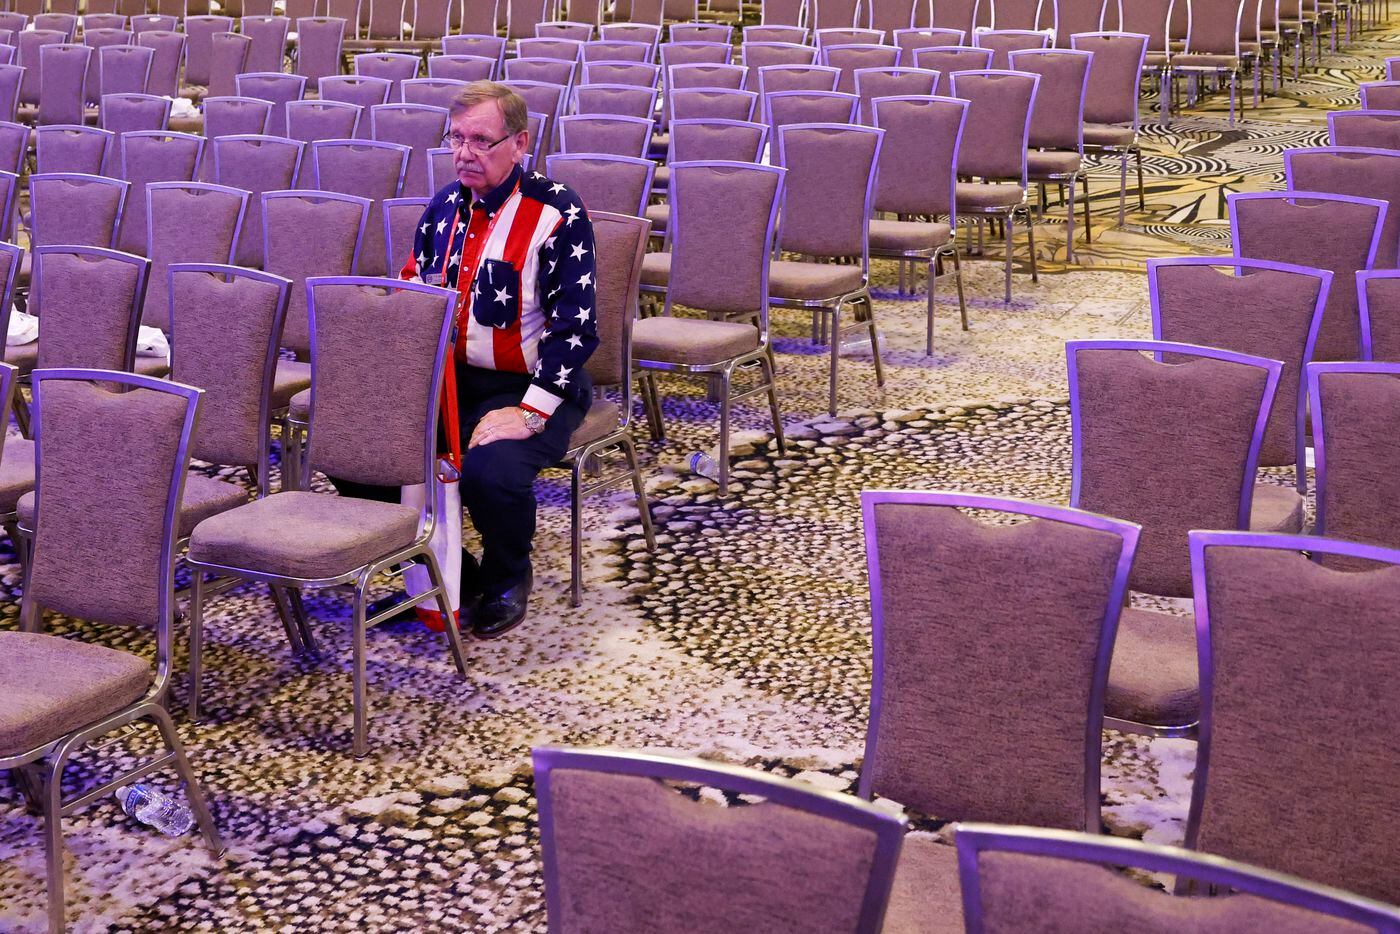 Attendee T.E Sumner wearing an attire of the U.S National flag sits by himself after the...